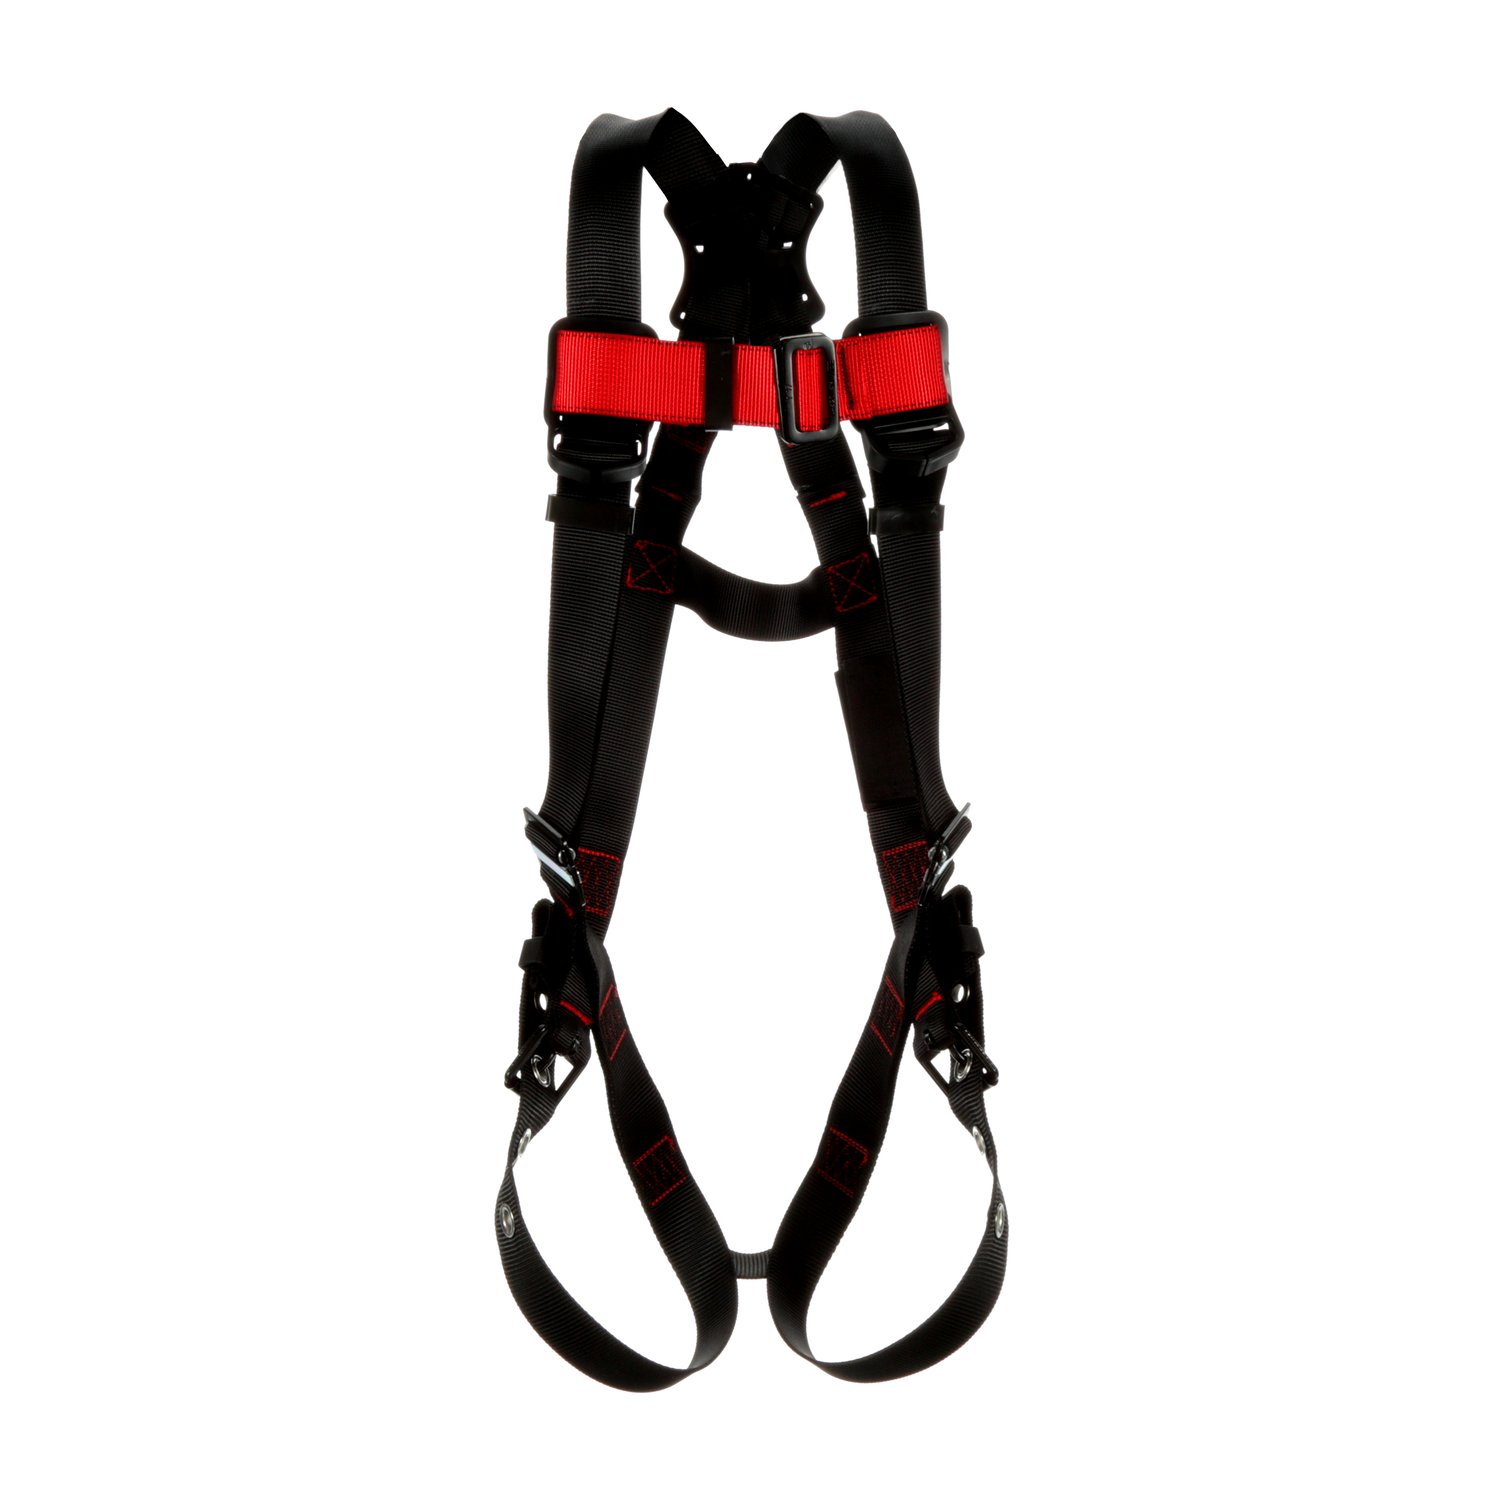 7012816807 - 3M Protecta P200 Vest Safety Harness 1161545, 3X